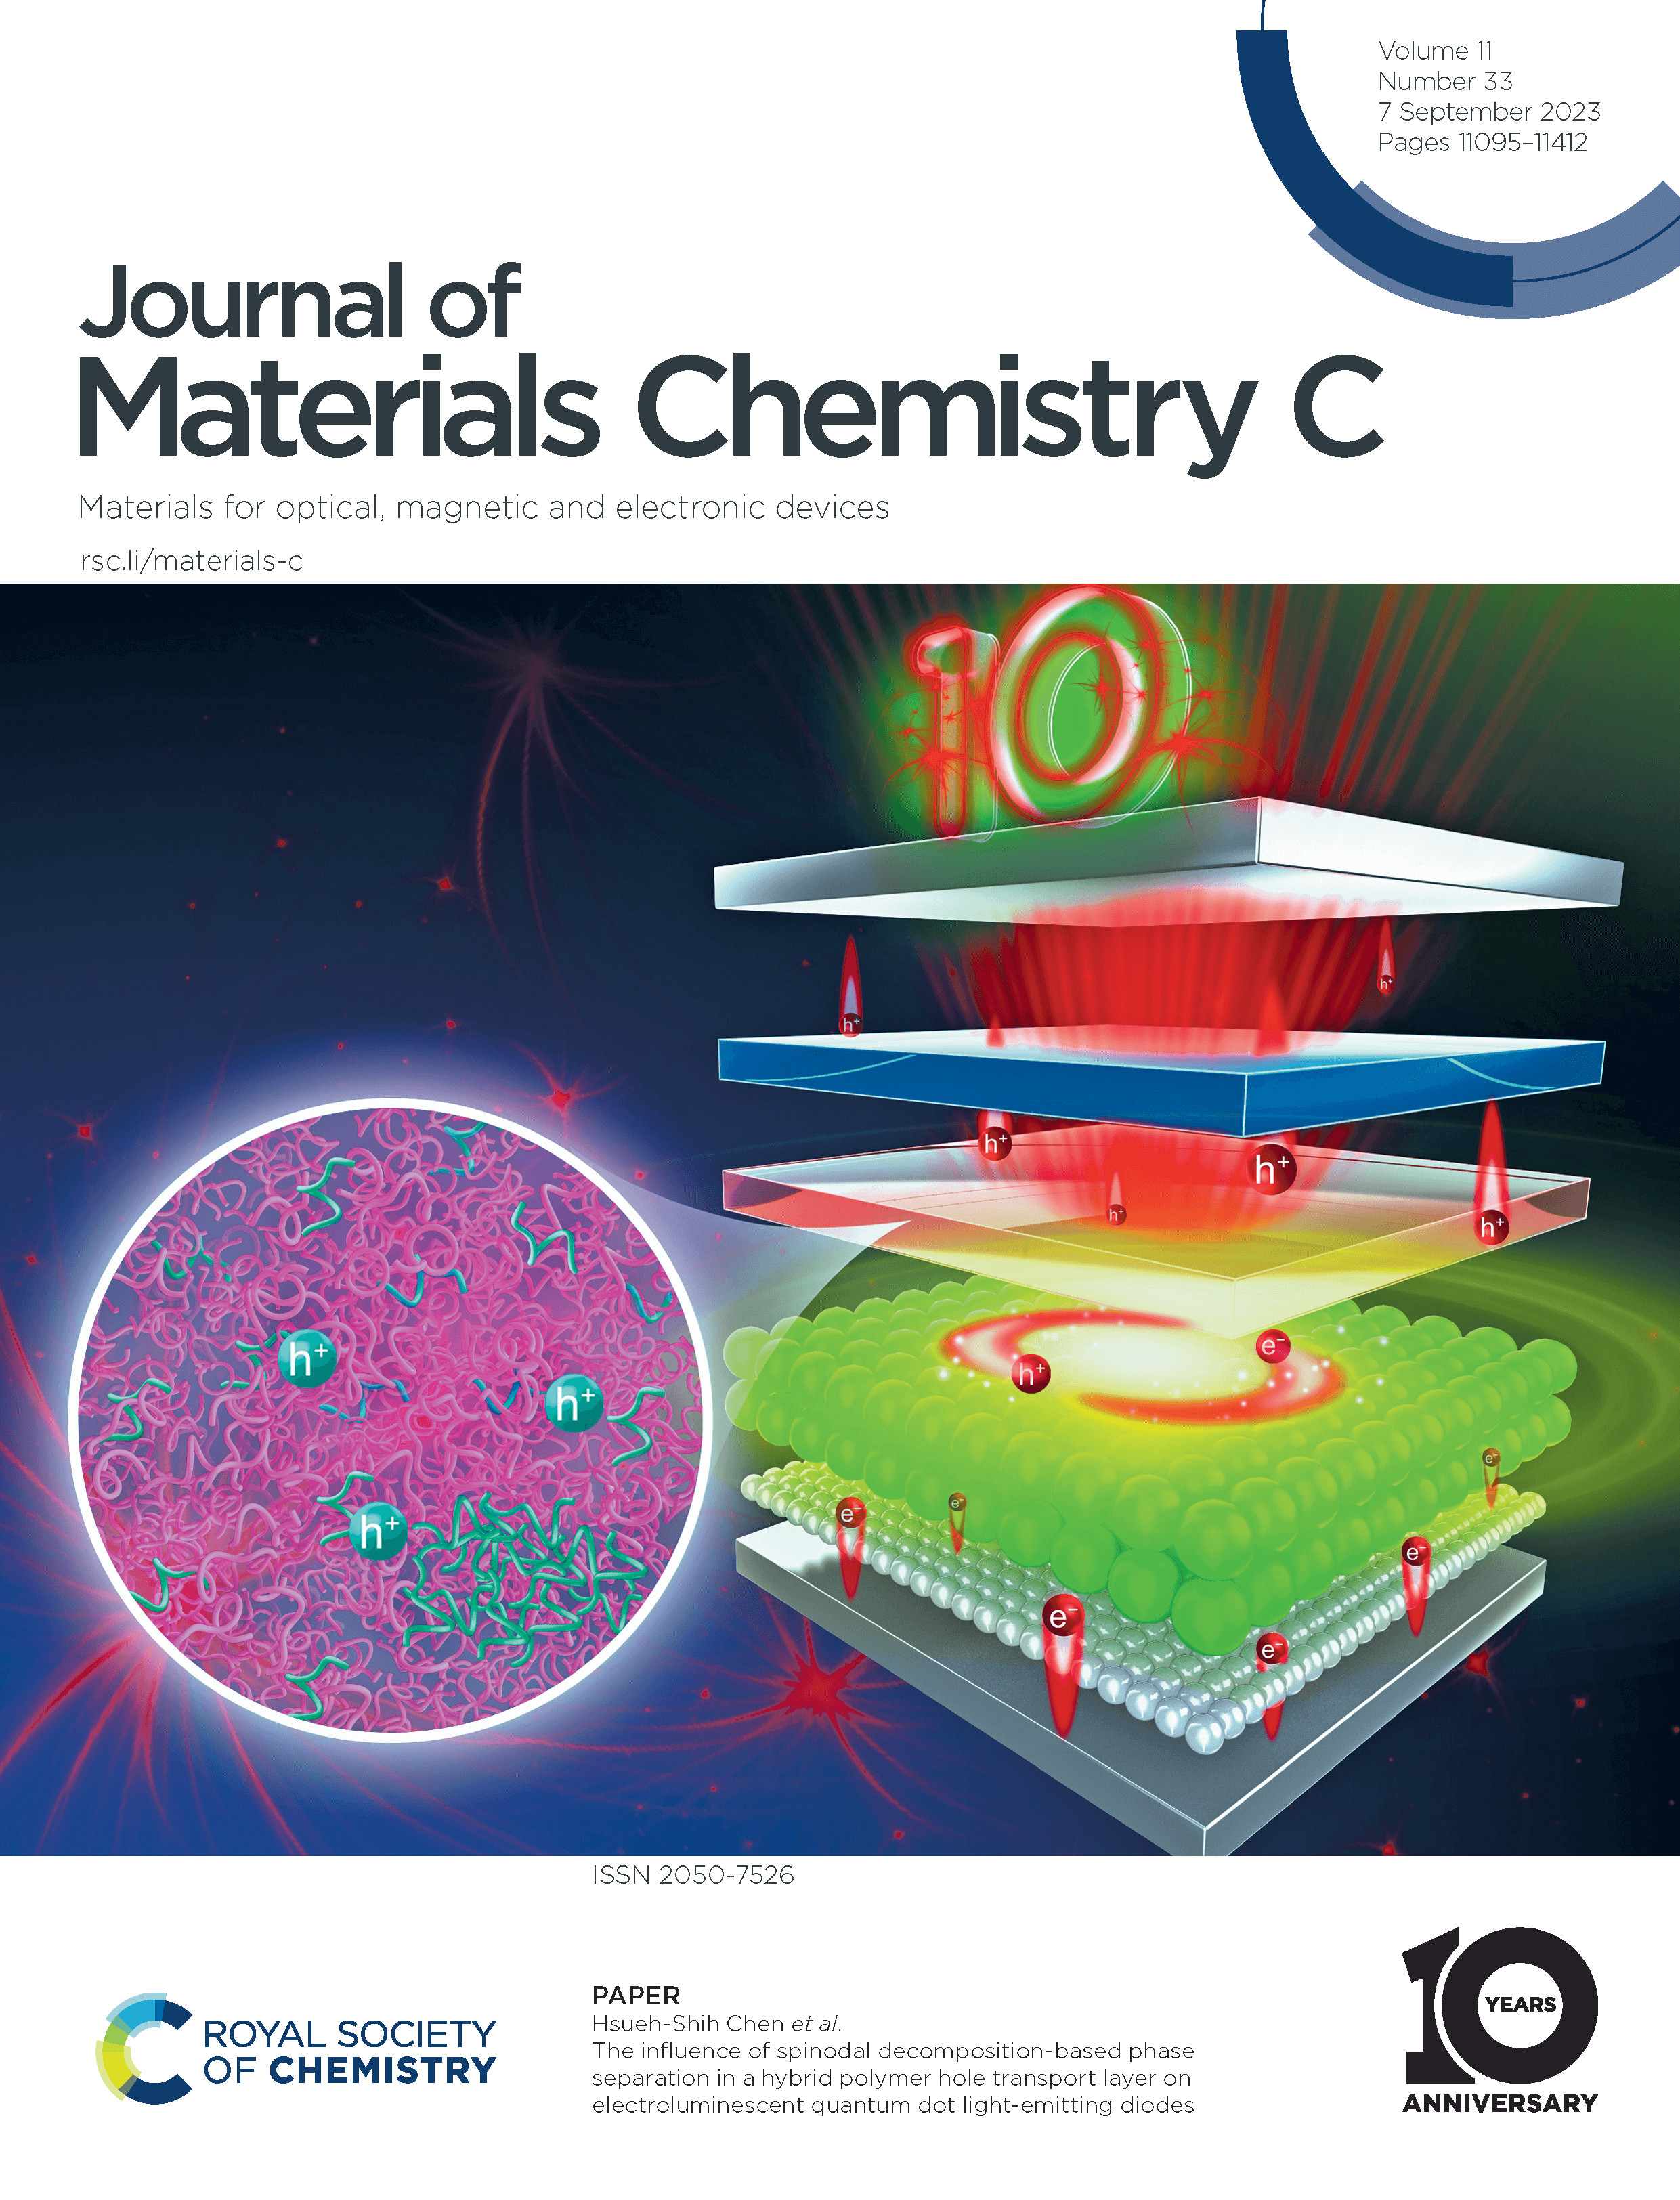 LetPub Journal Cover Art Design - The influence of spinodal decomposition-based phase separation in a hybrid polymer hole transport layer on electroluminescent quantum dot light-emitting diodes